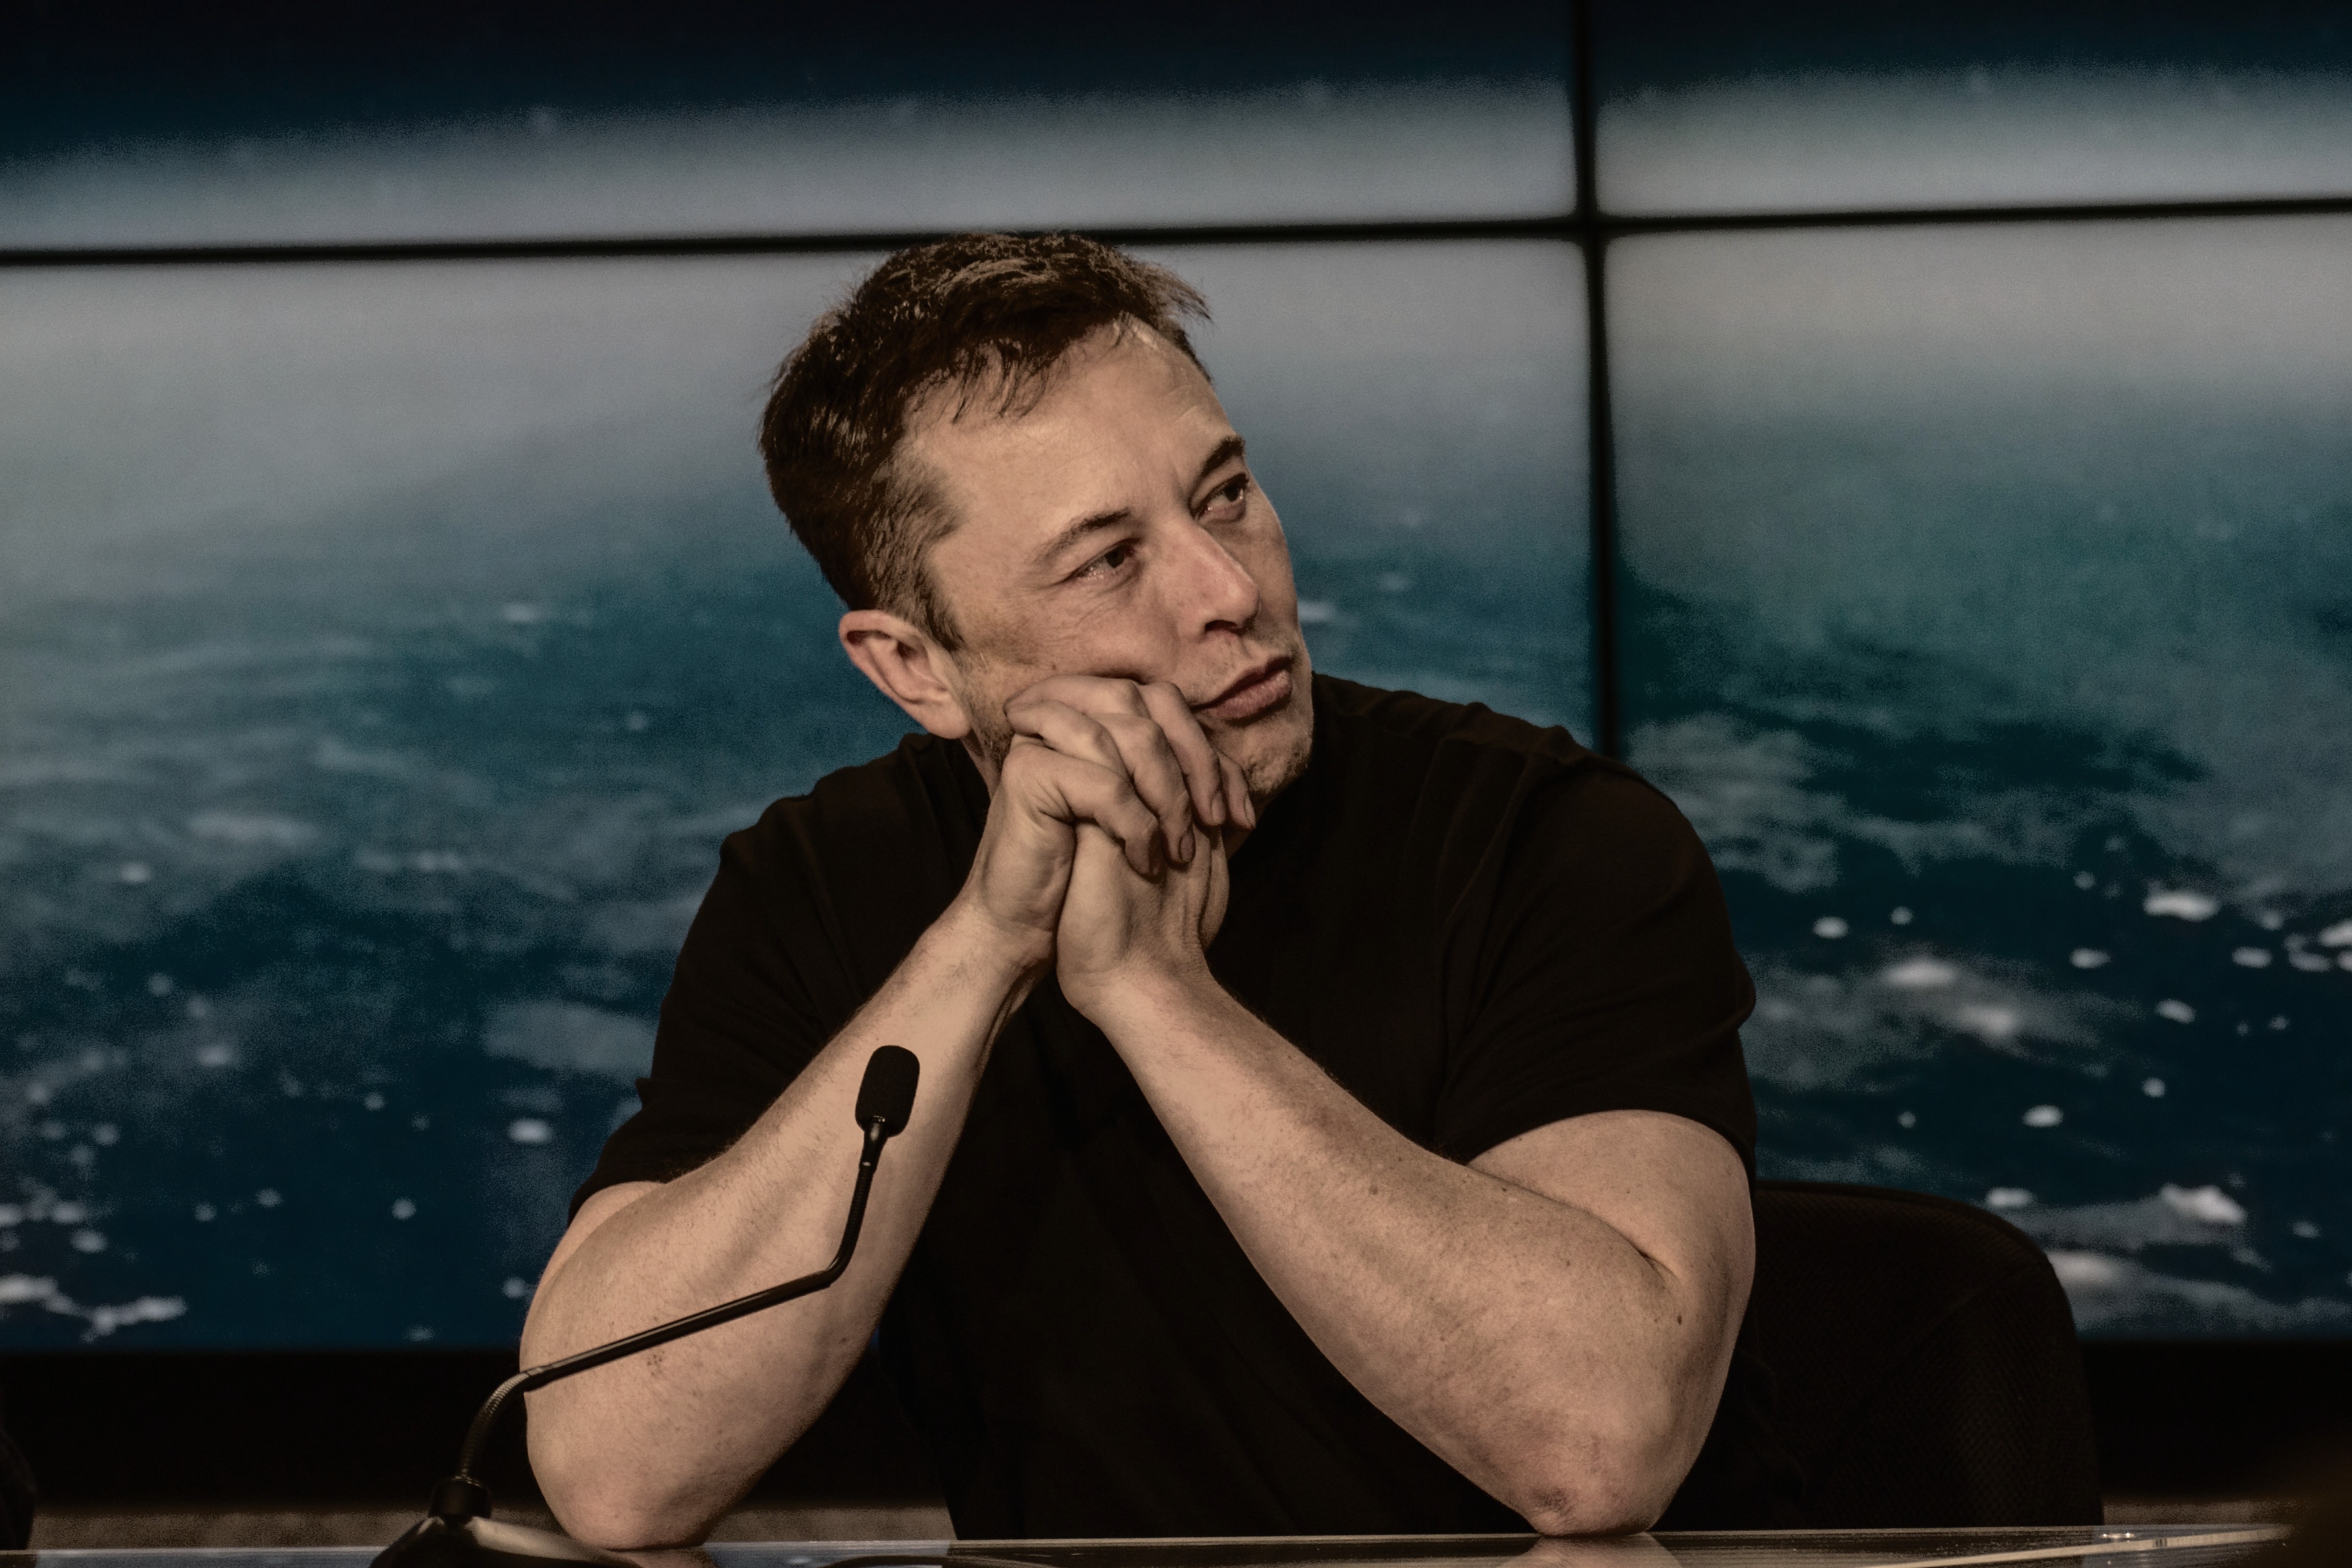 Elon Musk Says 'Extremely Concerning' As Brands Pull Ads From Parts Of Twitter Over Child Sexual Abuse Concerns